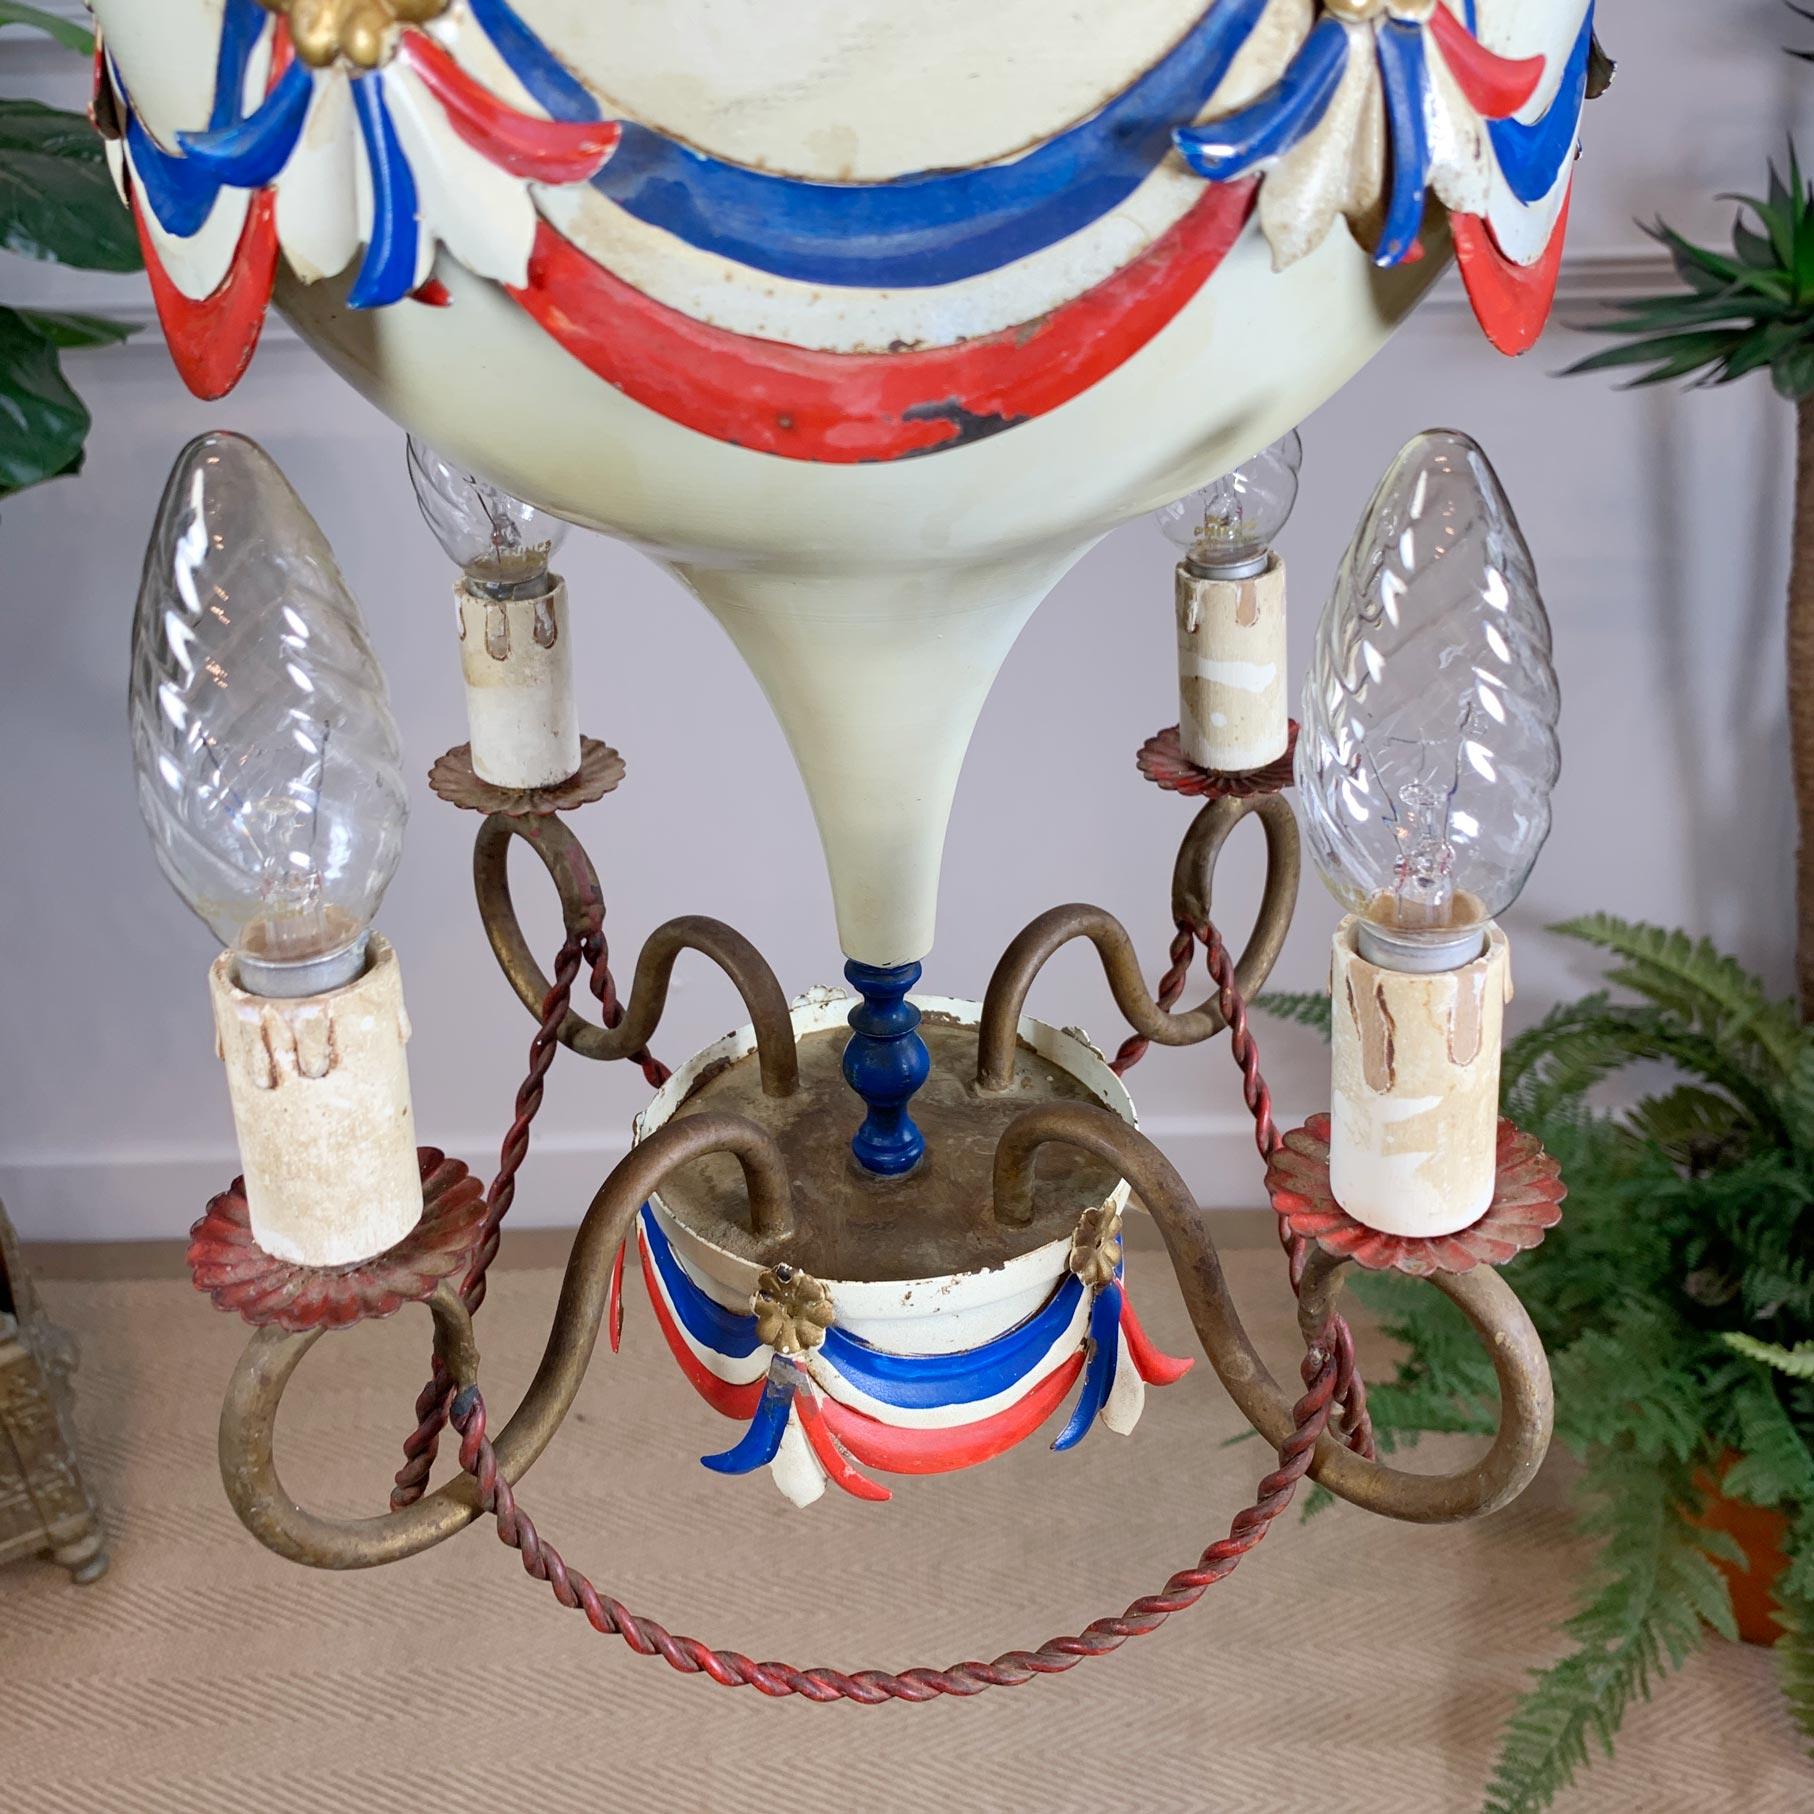 1950’s White Toleware Hot Air Balloon Chandelier For Sale 2